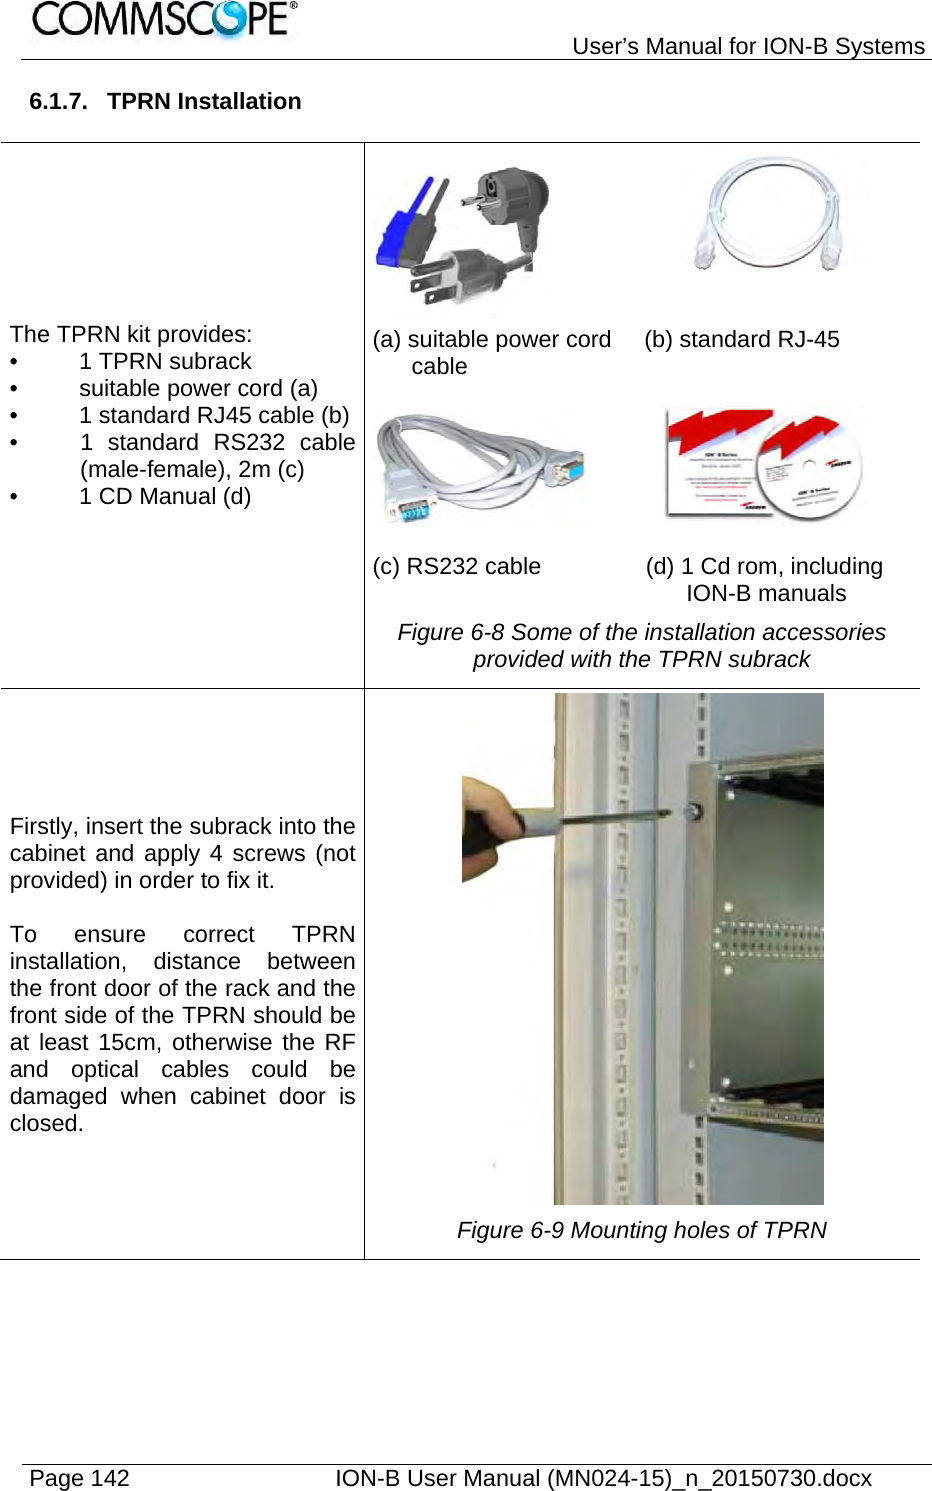   User’s Manual for ION-B Systems Page 142    ION-B User Manual (MN024-15)_n_20150730.docx  6.1.7. TPRN Installation  The TPRN kit provides: •  1 TPRN subrack  •  suitable power cord (a) •  1 standard RJ45 cable (b) •  1 standard RS232 cable (male-female), 2m (c)  •  1 CD Manual (d)                        (a) suitable power cord     (b) standard RJ-45       cable                (c) RS232 cable                (d) 1 Cd rom, including                                                 ION-B manuals Figure 6-8 Some of the installation accessories provided with the TPRN subrack Firstly, insert the subrack into the cabinet and apply 4 screws (not provided) in order to fix it.  To ensure correct TPRN installation, distance between the front door of the rack and the front side of the TPRN should be at least 15cm, otherwise the RF and optical cables could be damaged when cabinet door is closed.  Figure 6-9 Mounting holes of TPRN   